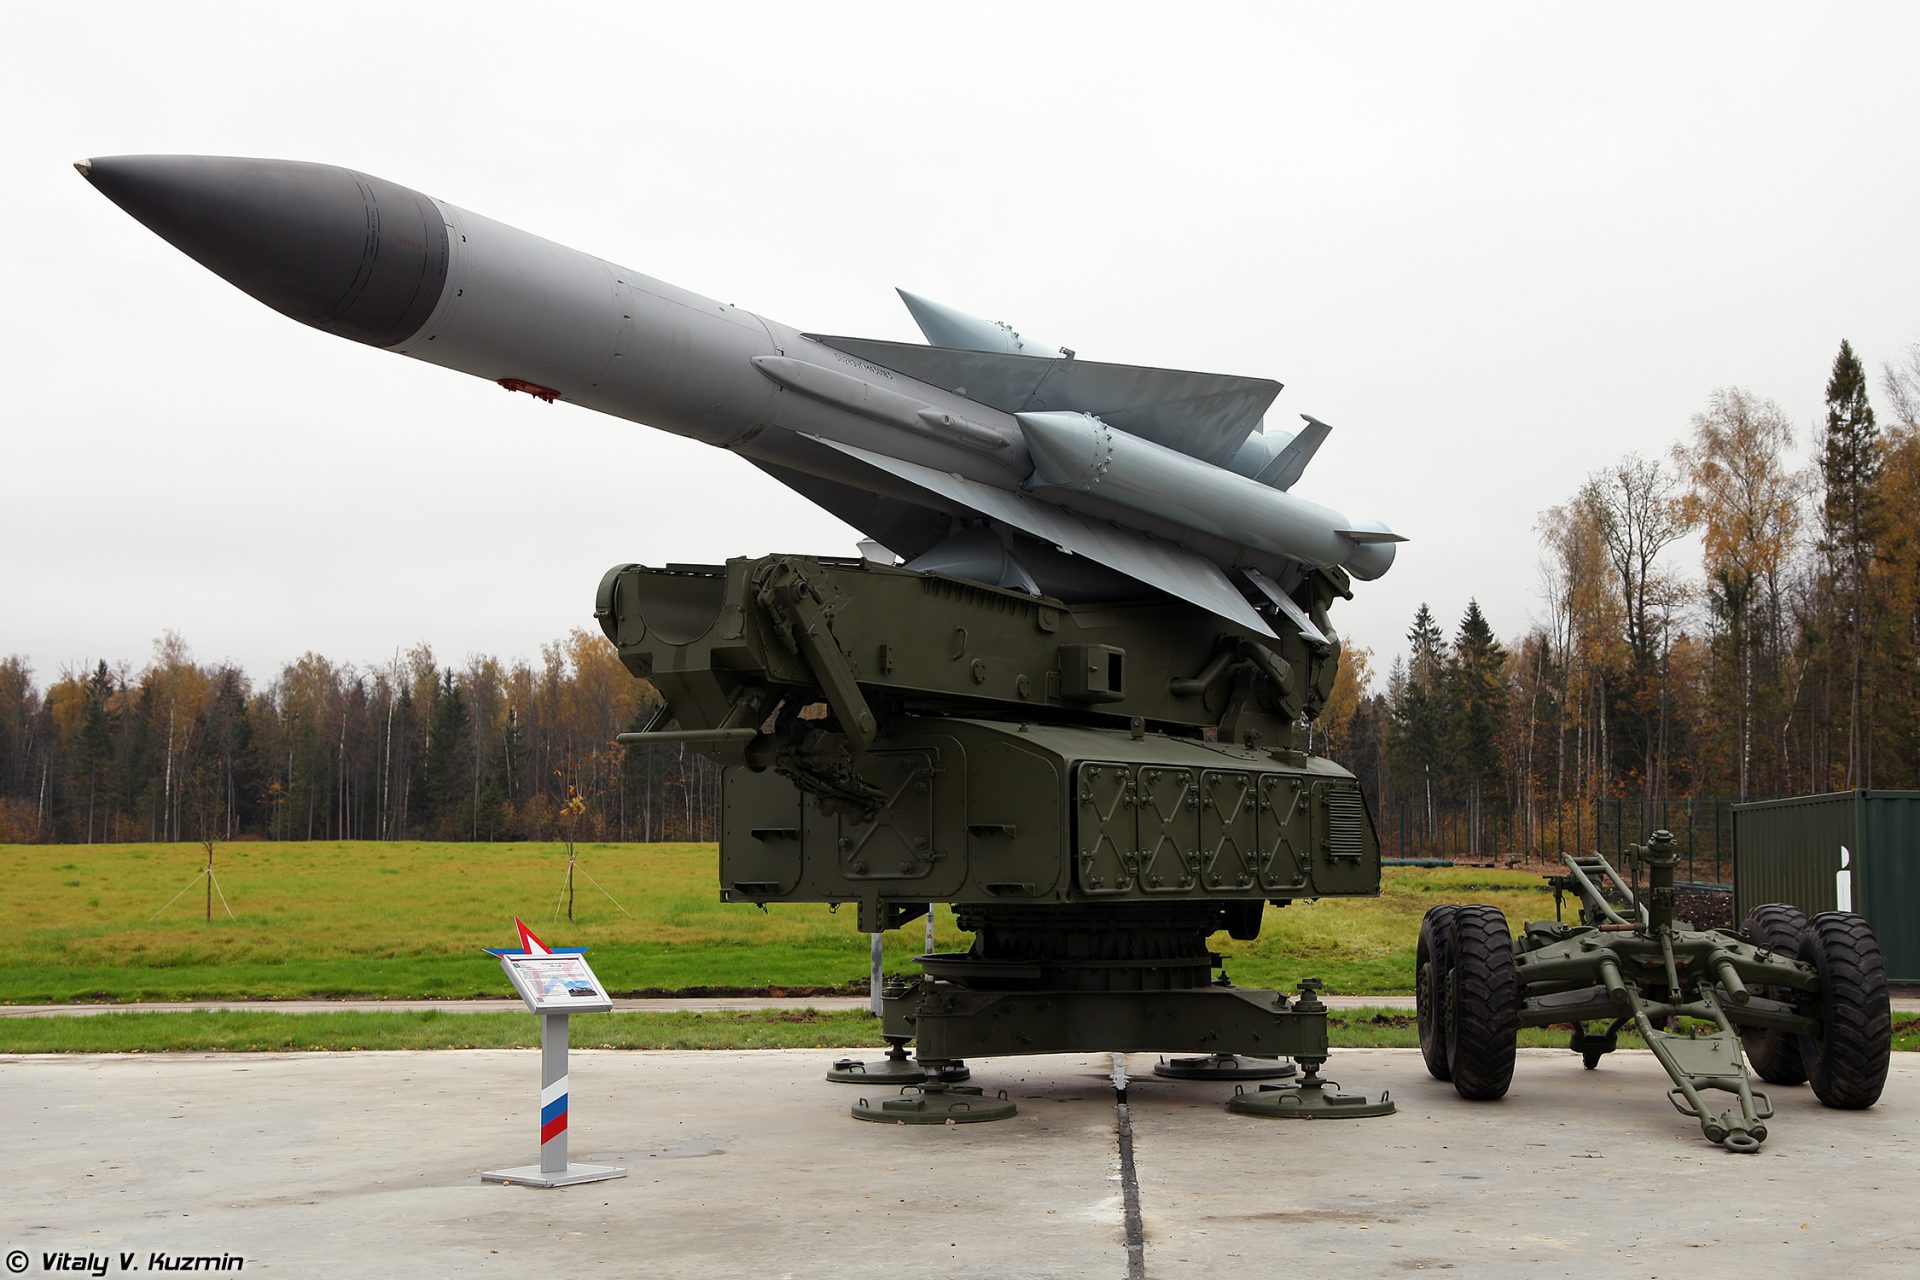 The S-200 air defense system